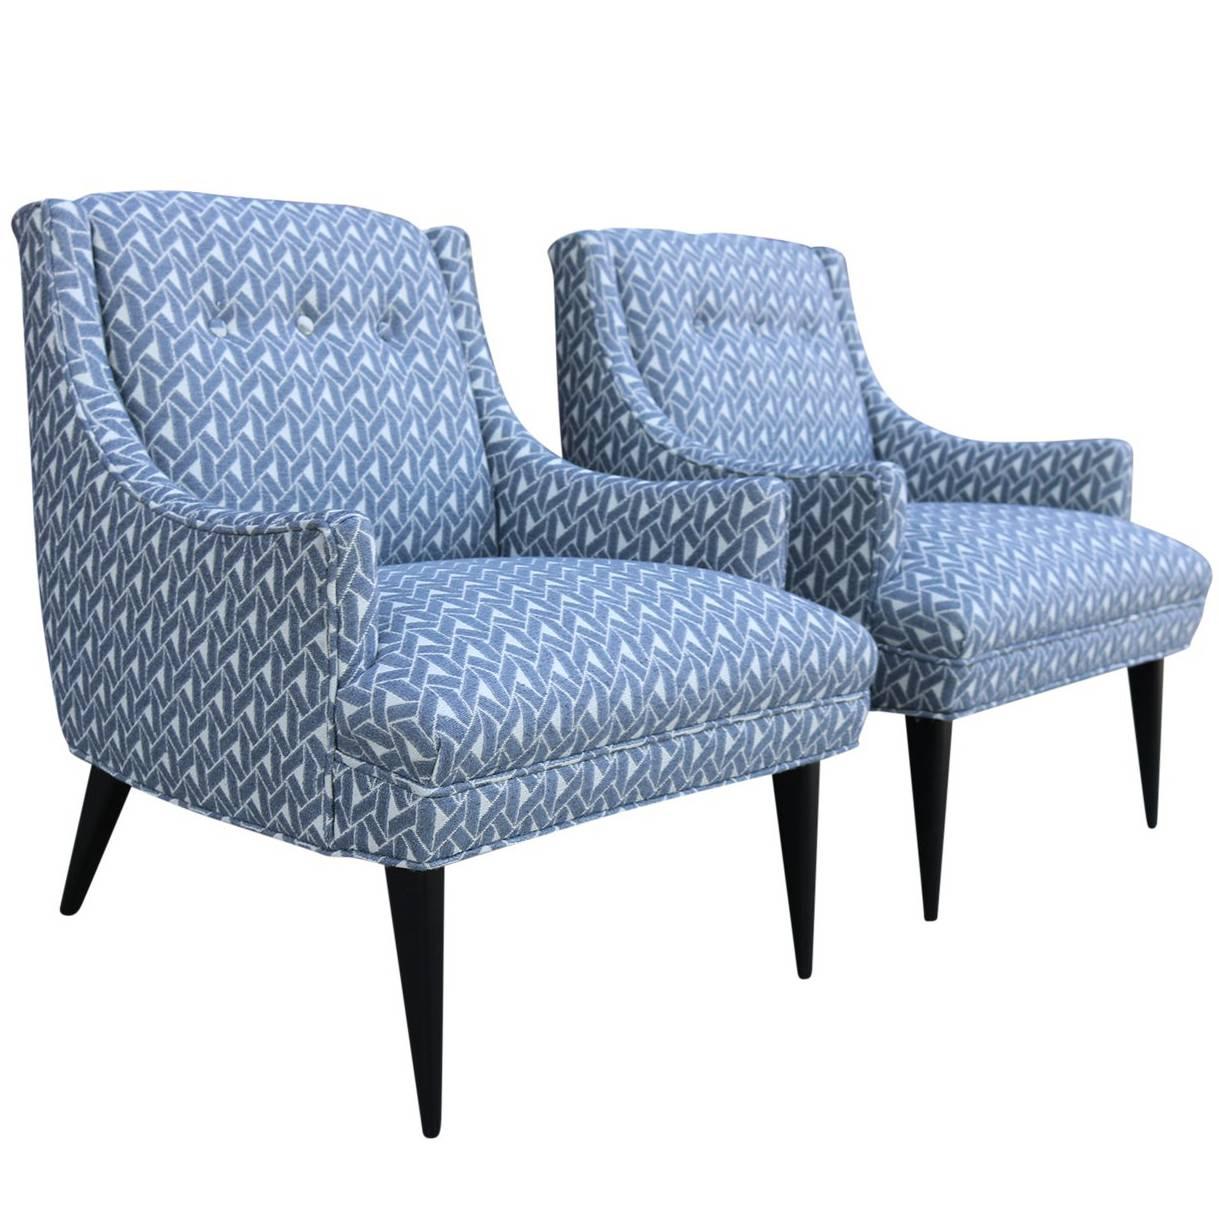 Pair of Mid-Century Modern Armchairs with Grey and White Geometric Upholstery